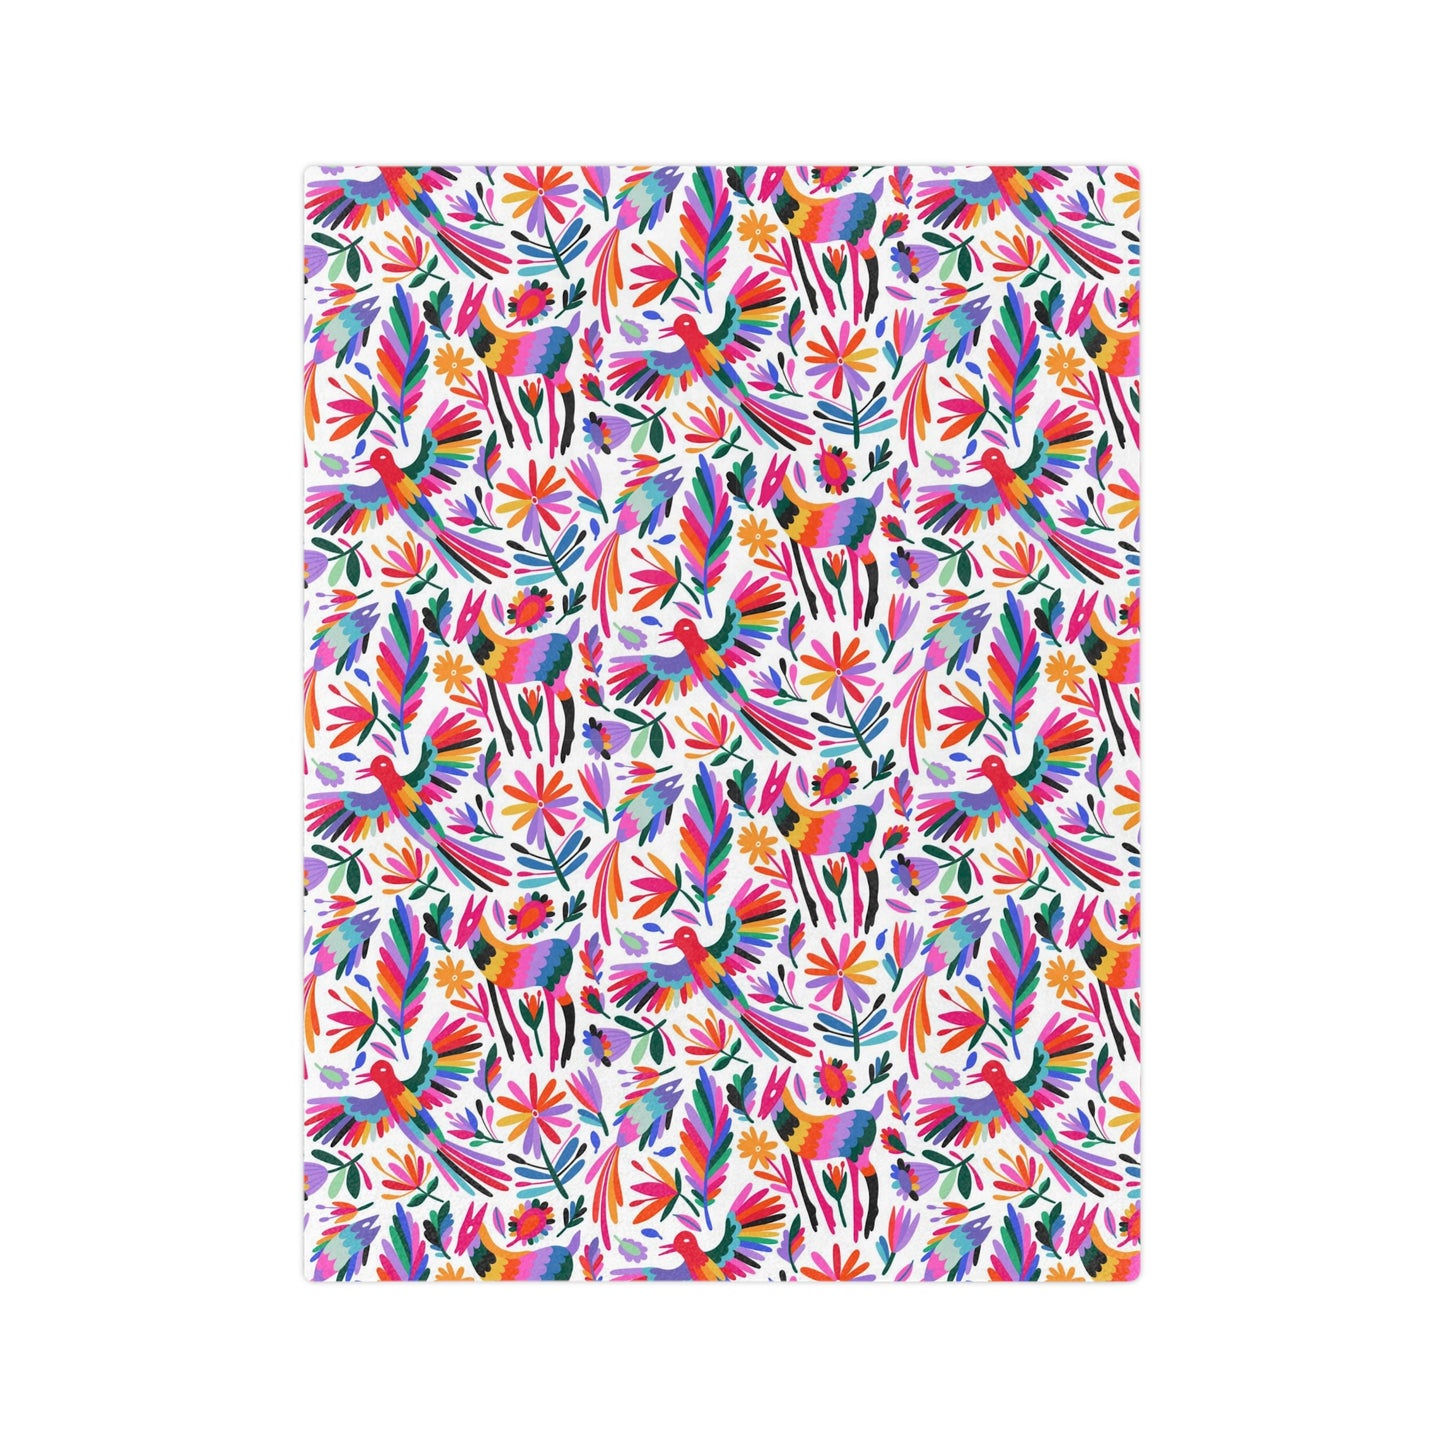 Otomi Velveteen Minky Blanket for Mexican home decor. Christmas gift for him or her. Mexican blanket with colorful Otomi art.